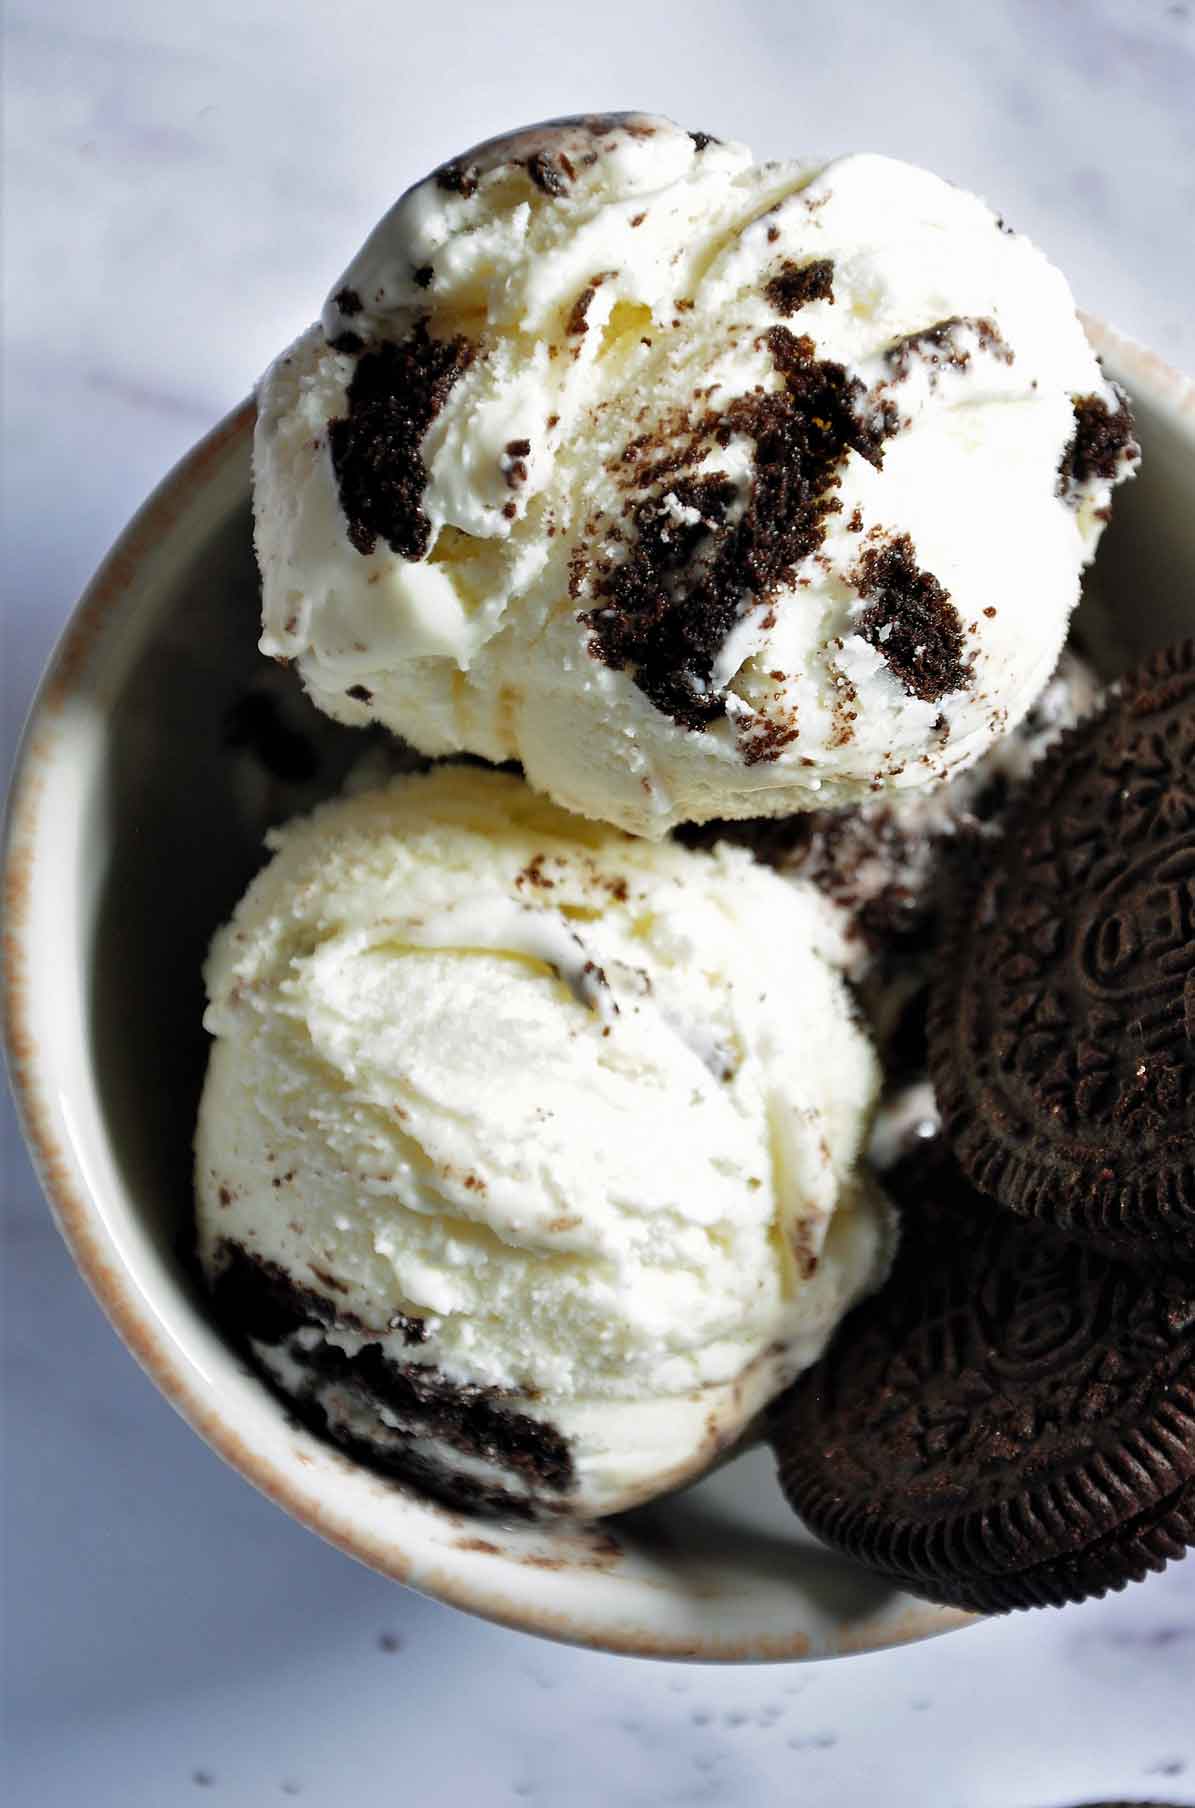 Two scoops of Oreo ice cream with 2 oreo cookies in a bowl.